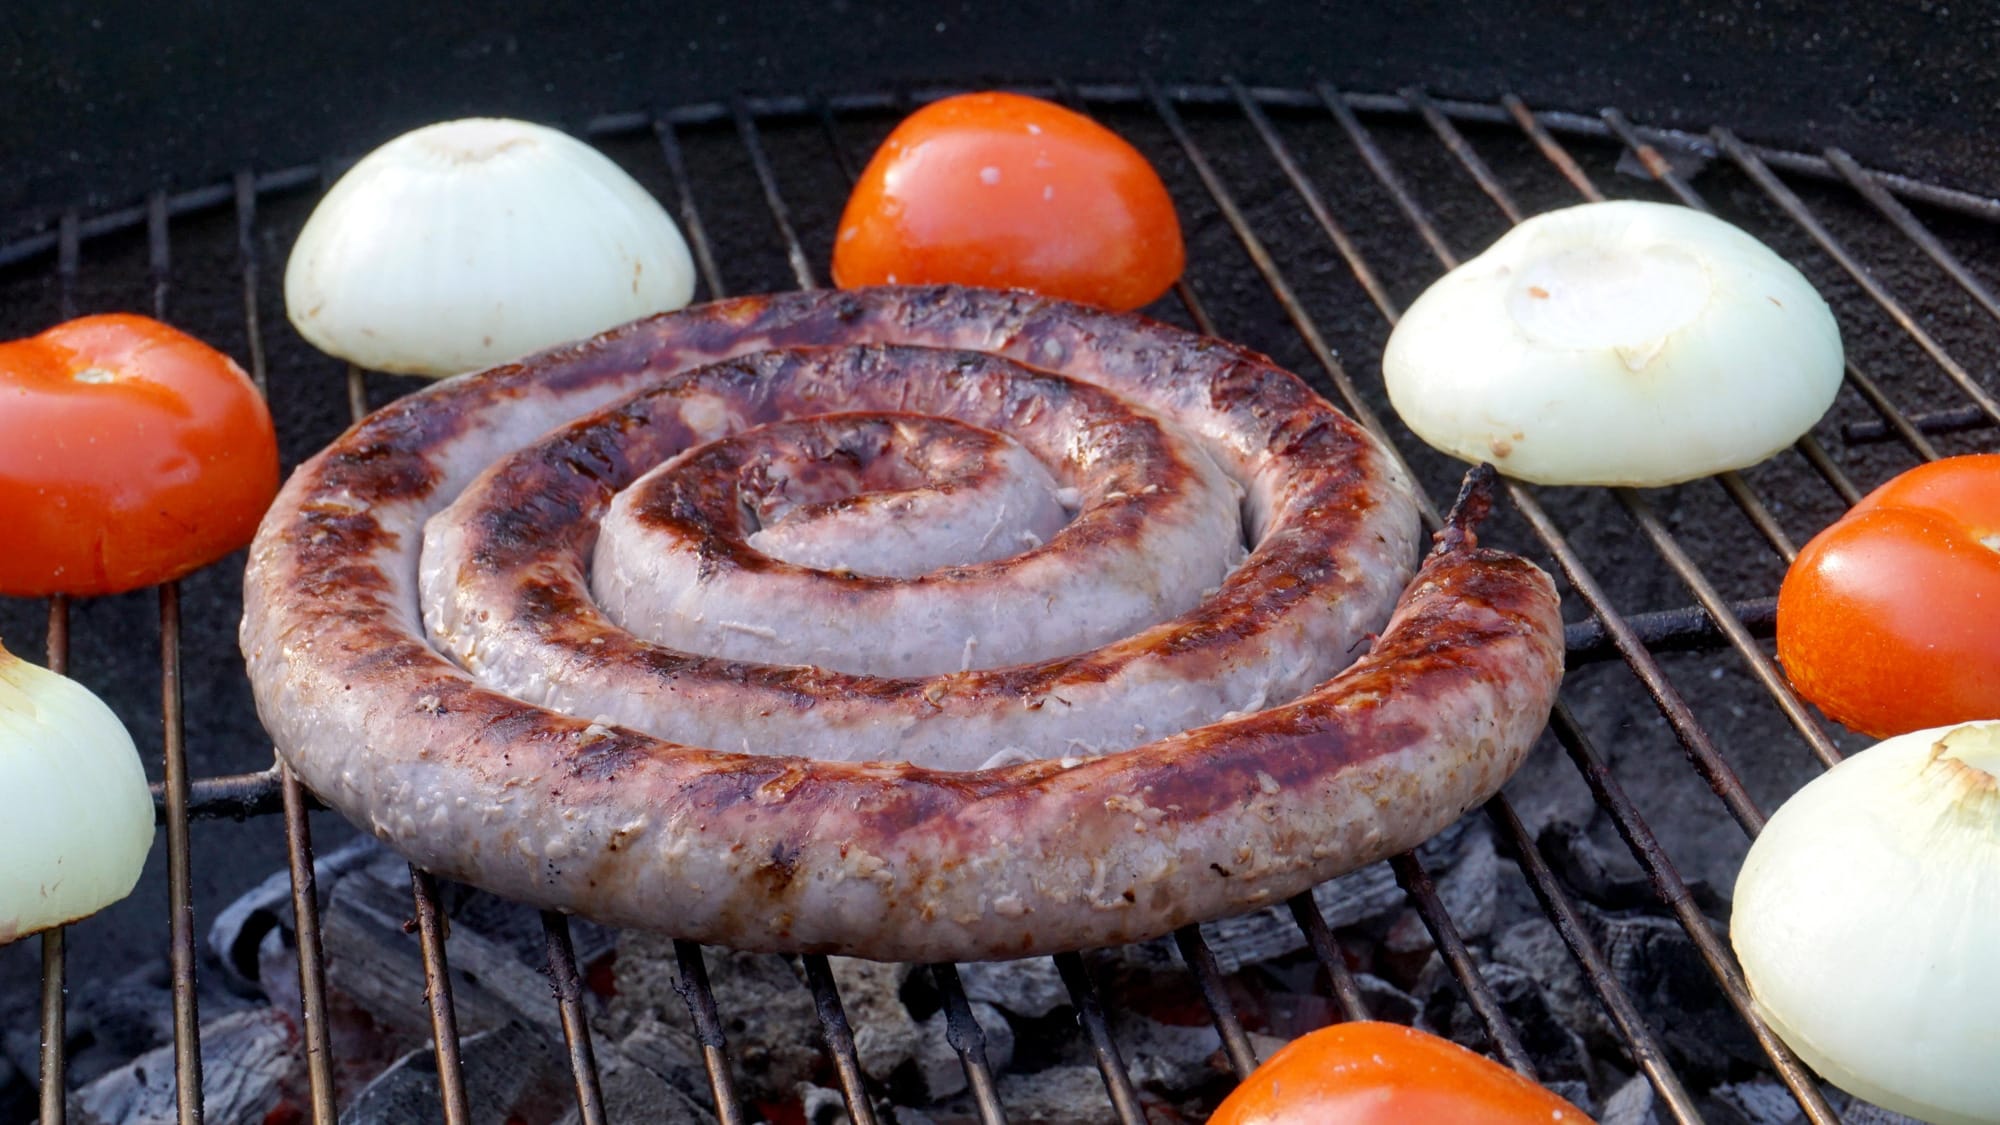 Boerewors South African Sausage And A